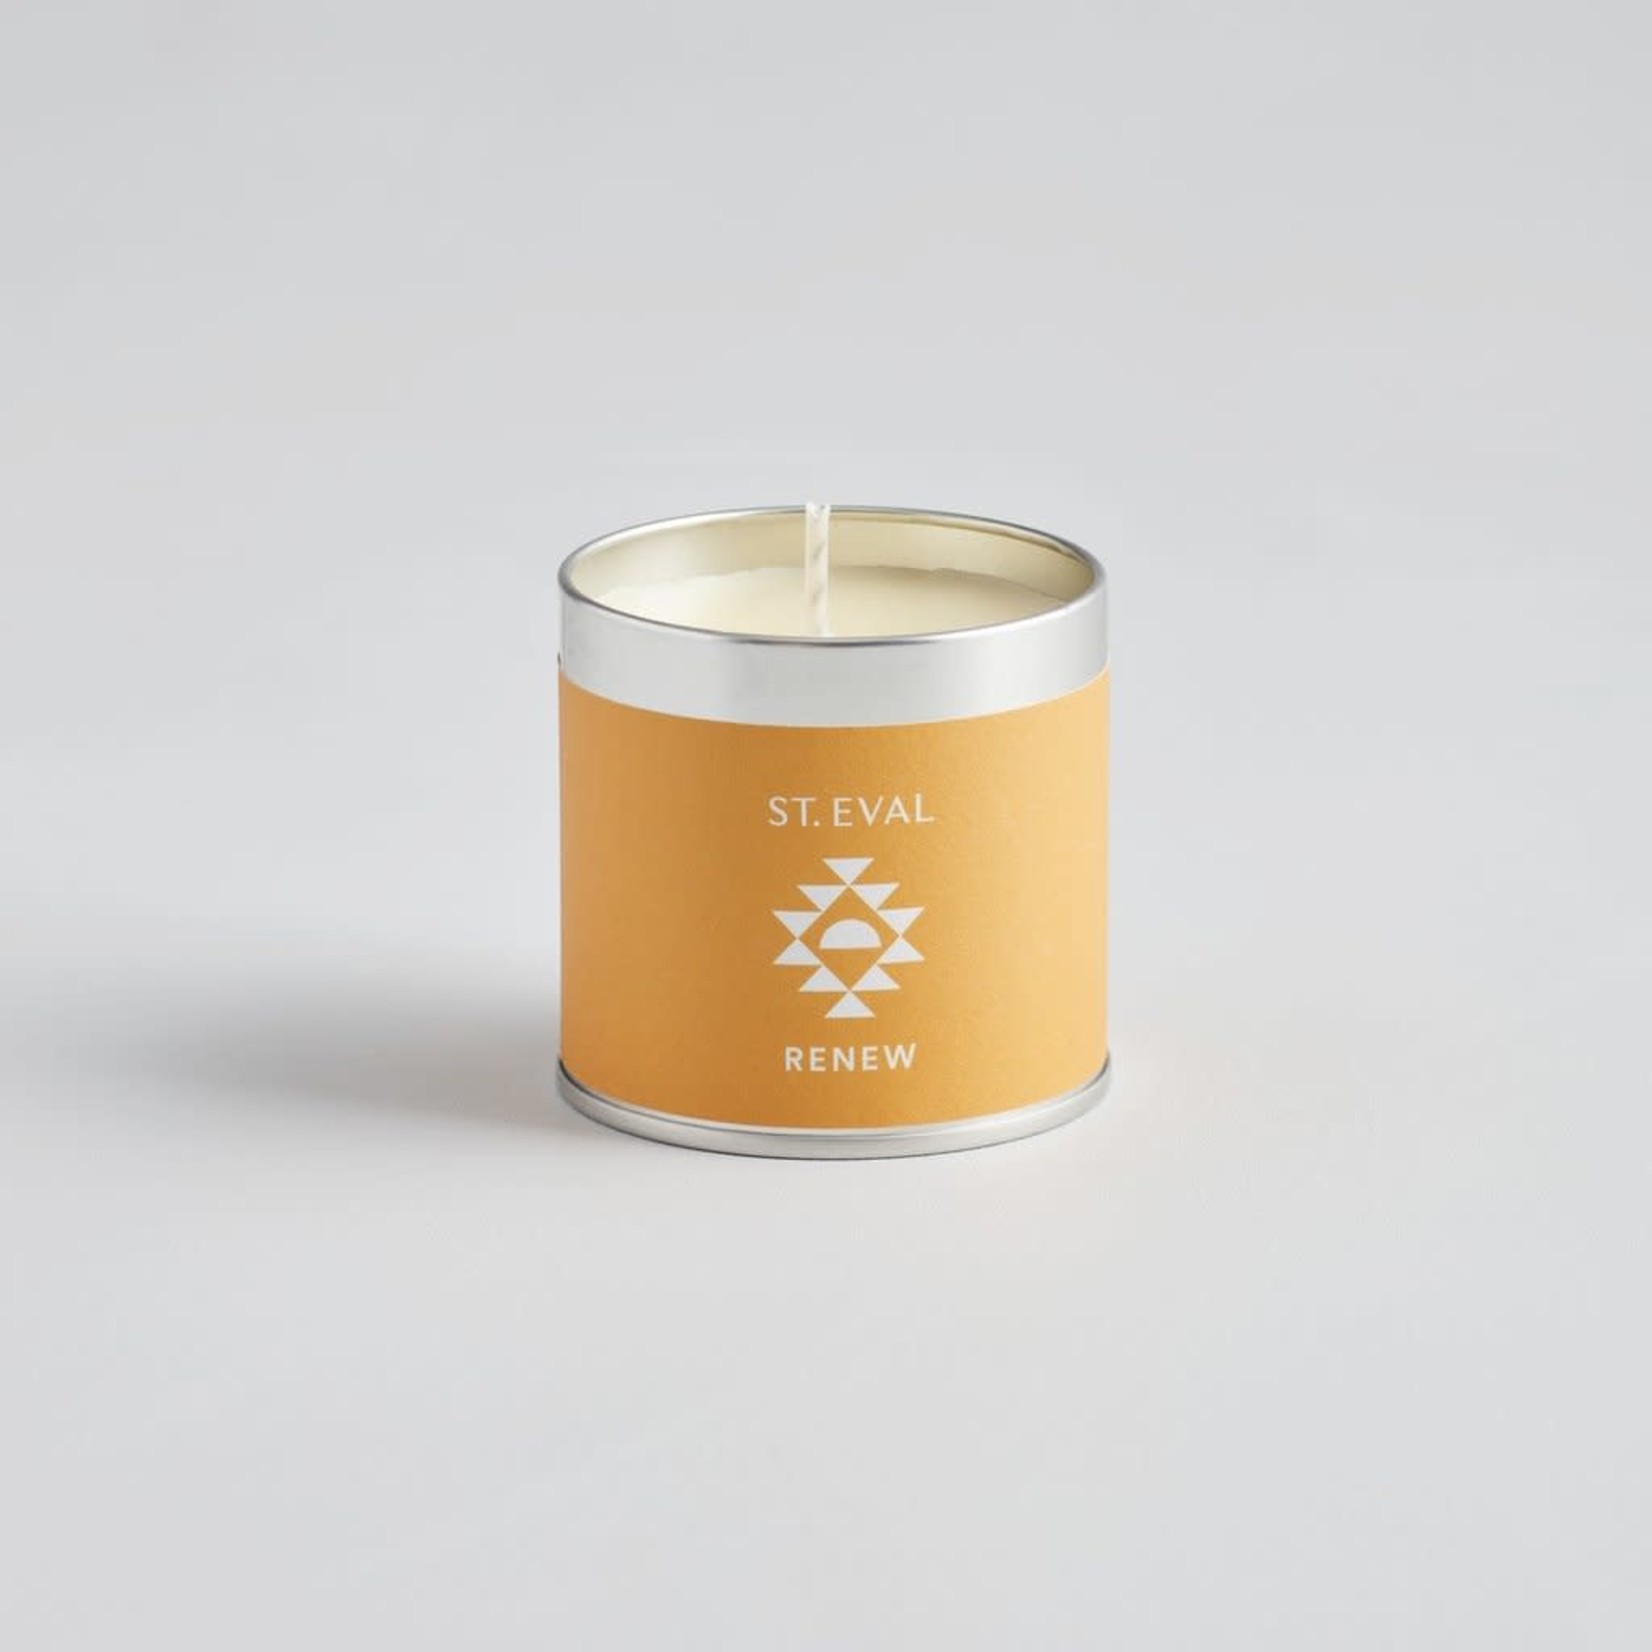 St. Eval St Eval Retreat Tin Renew Tangerine Lime and Herbs